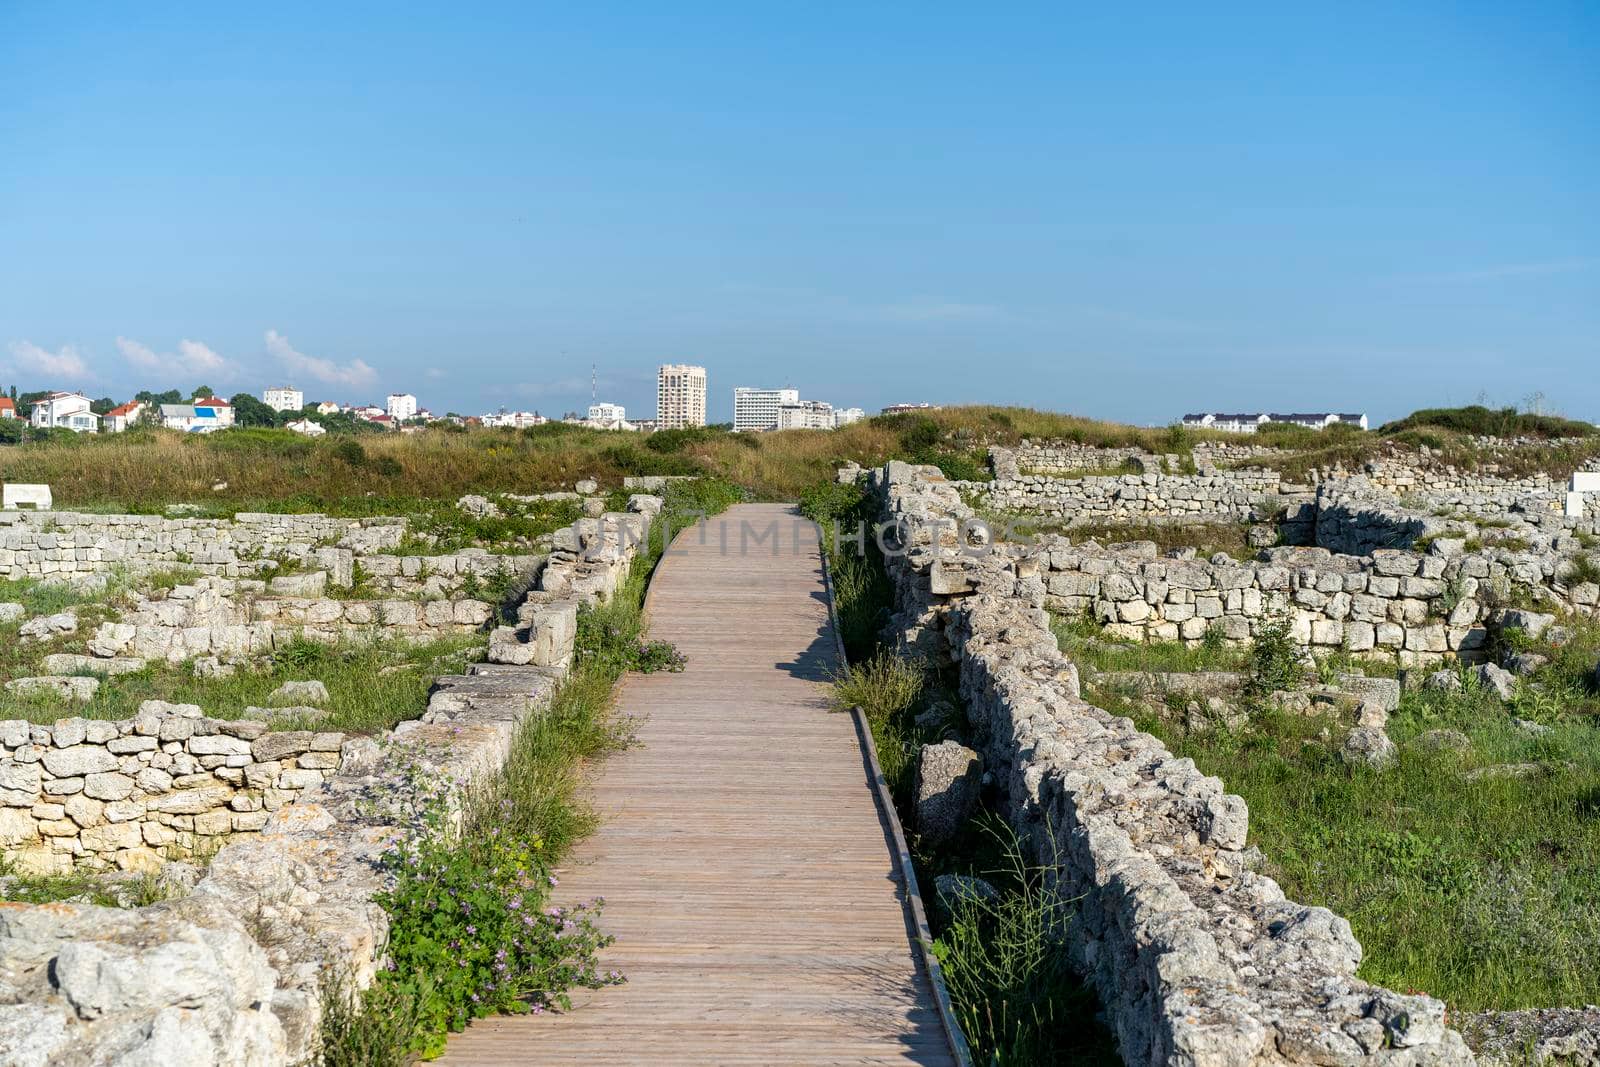 Landscape with a view of the stones and ruins of the historical Chersonesos in Sevastopol.